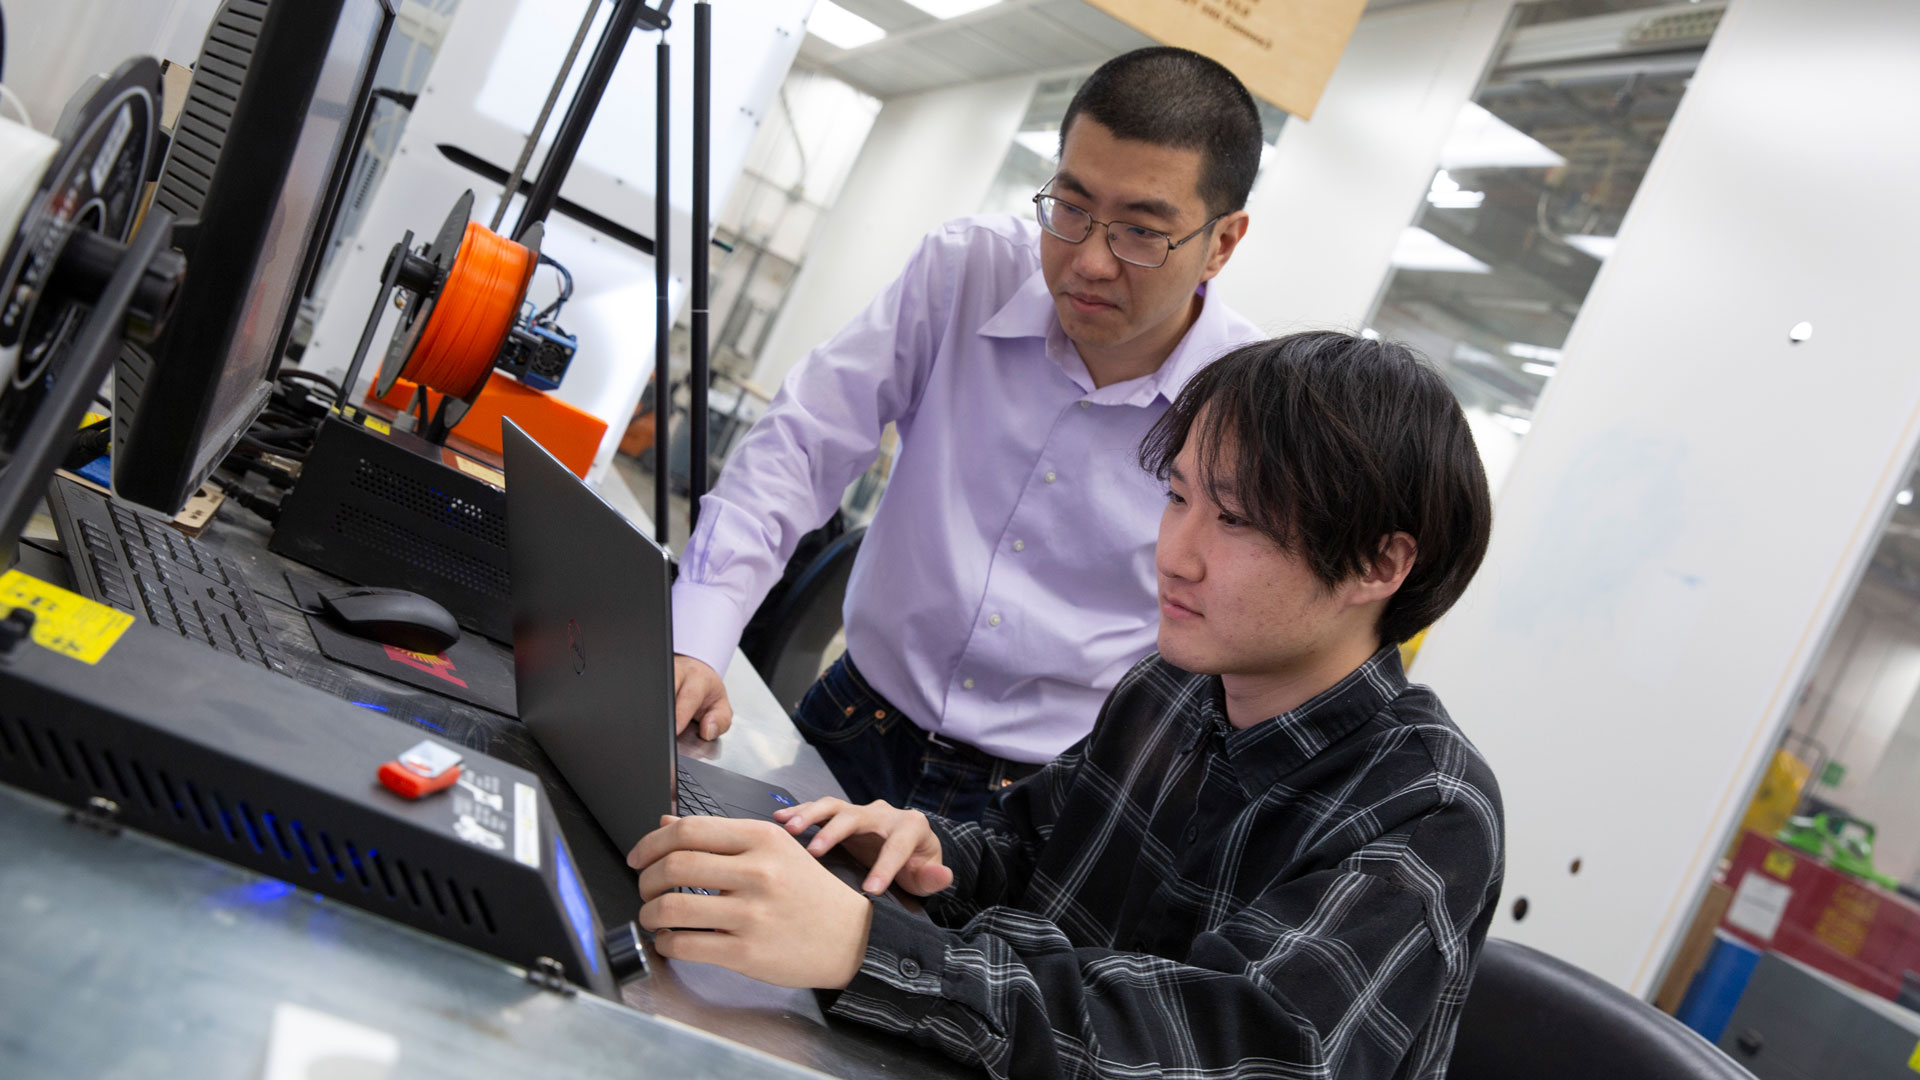 Zhengbin Chen (right), a senior engineering major focusing on the robotics concentration, works on an additive manufacturing model with his faculty mentor, Andi Wang, an assistant professor of manufacturing engineering.